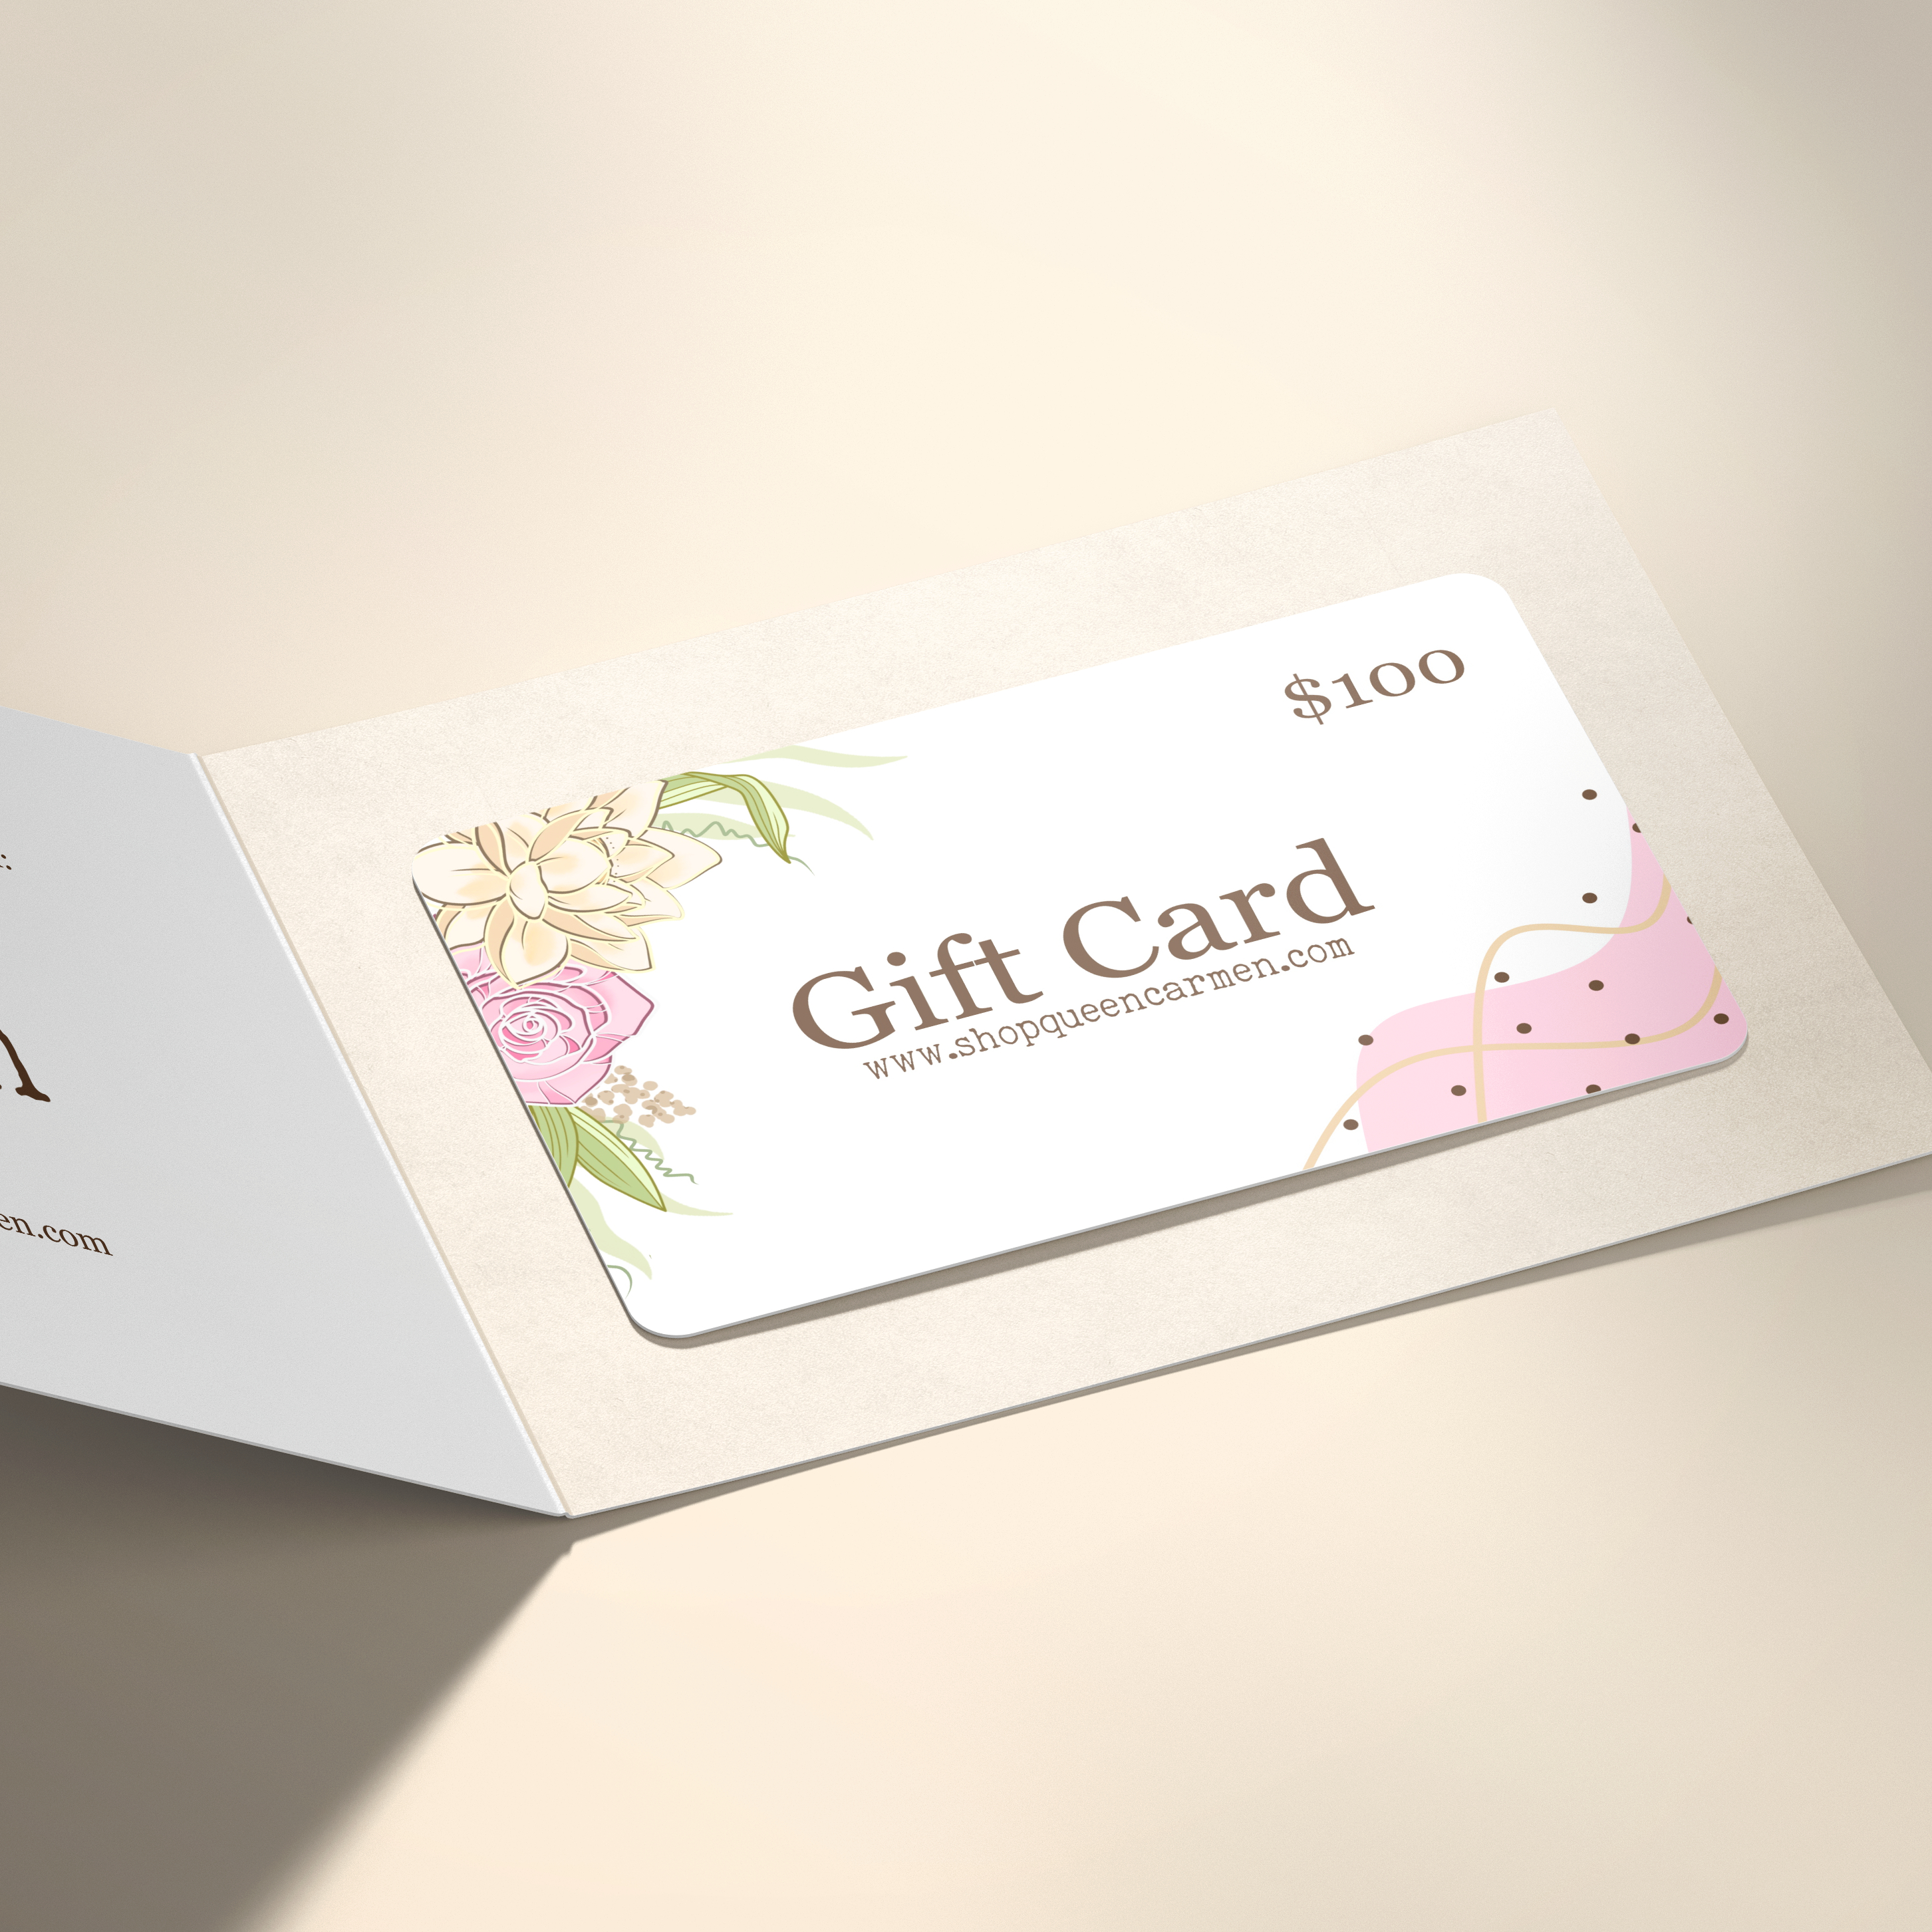 Virtual Gift Card, e-gift card, boutique gift cards, digital gift cards